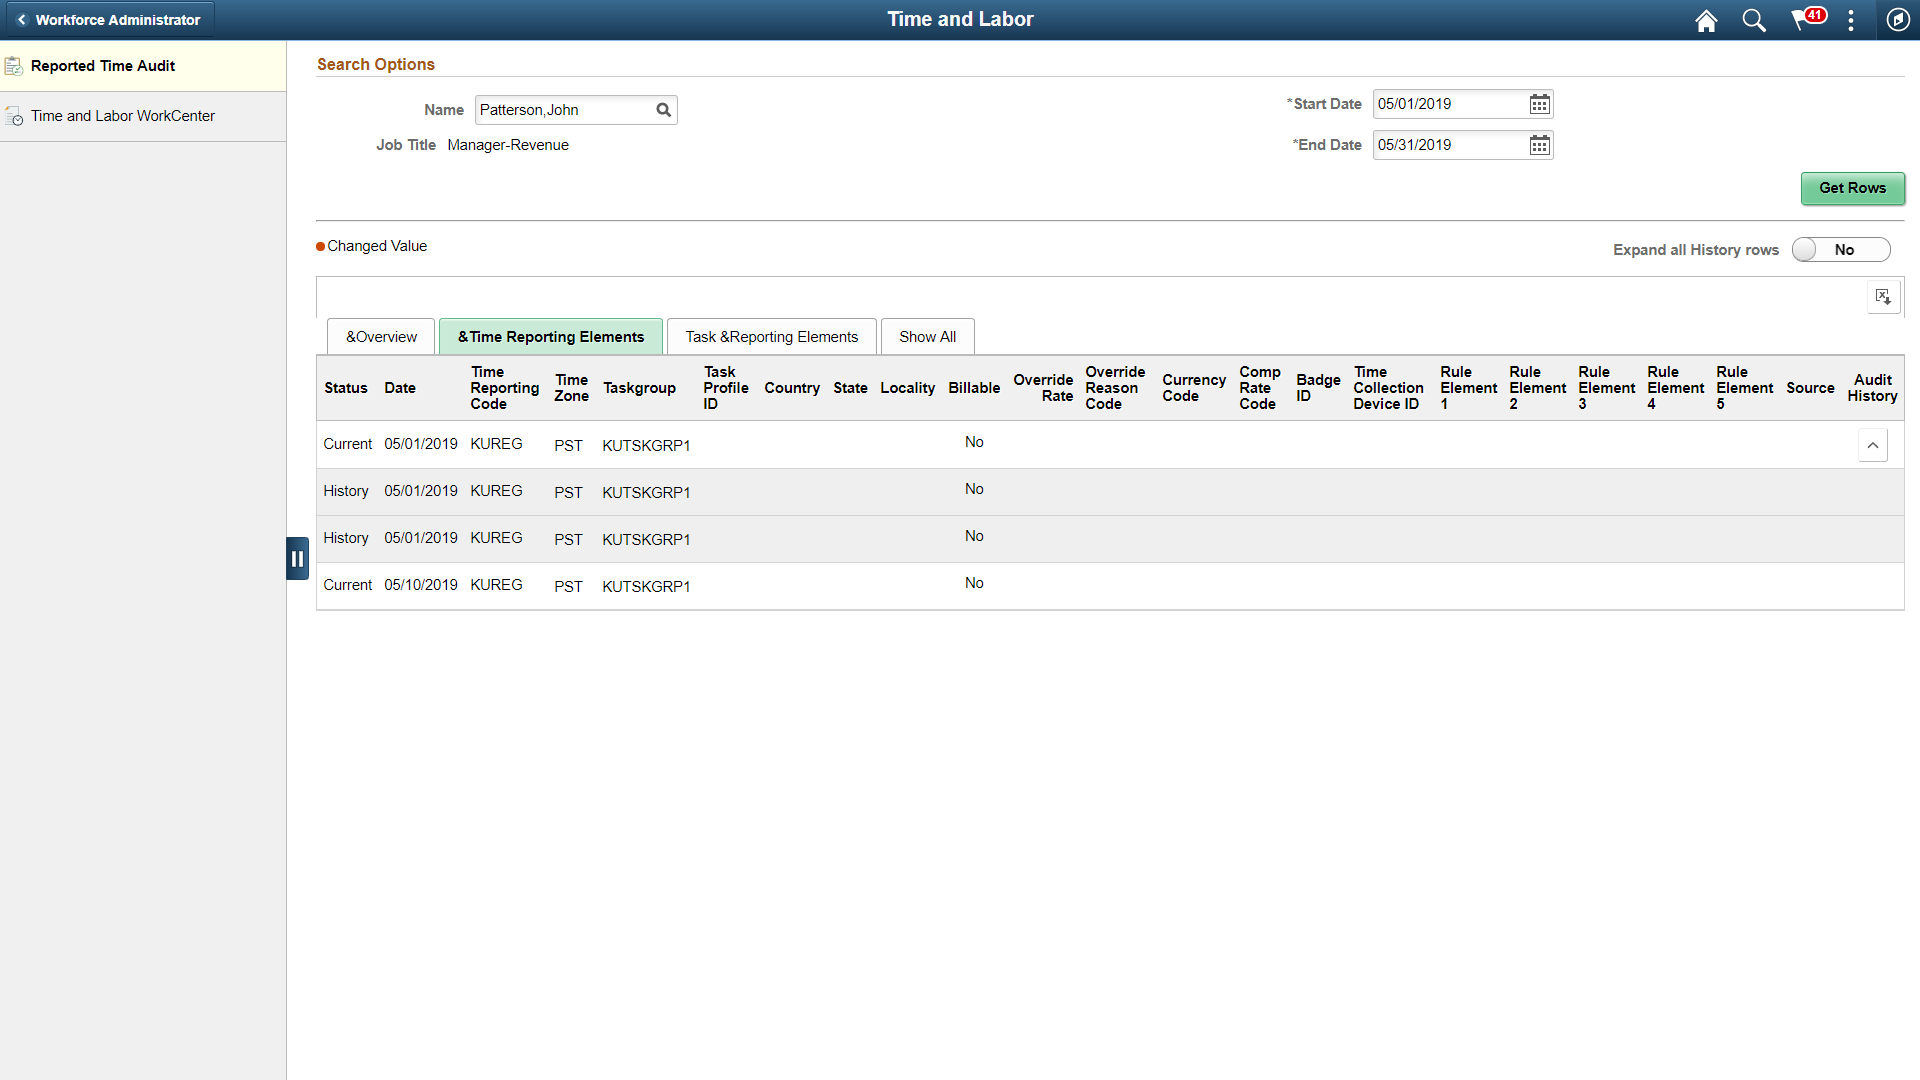 Report Time Audit page_Time Reporting Elements for Elapsed